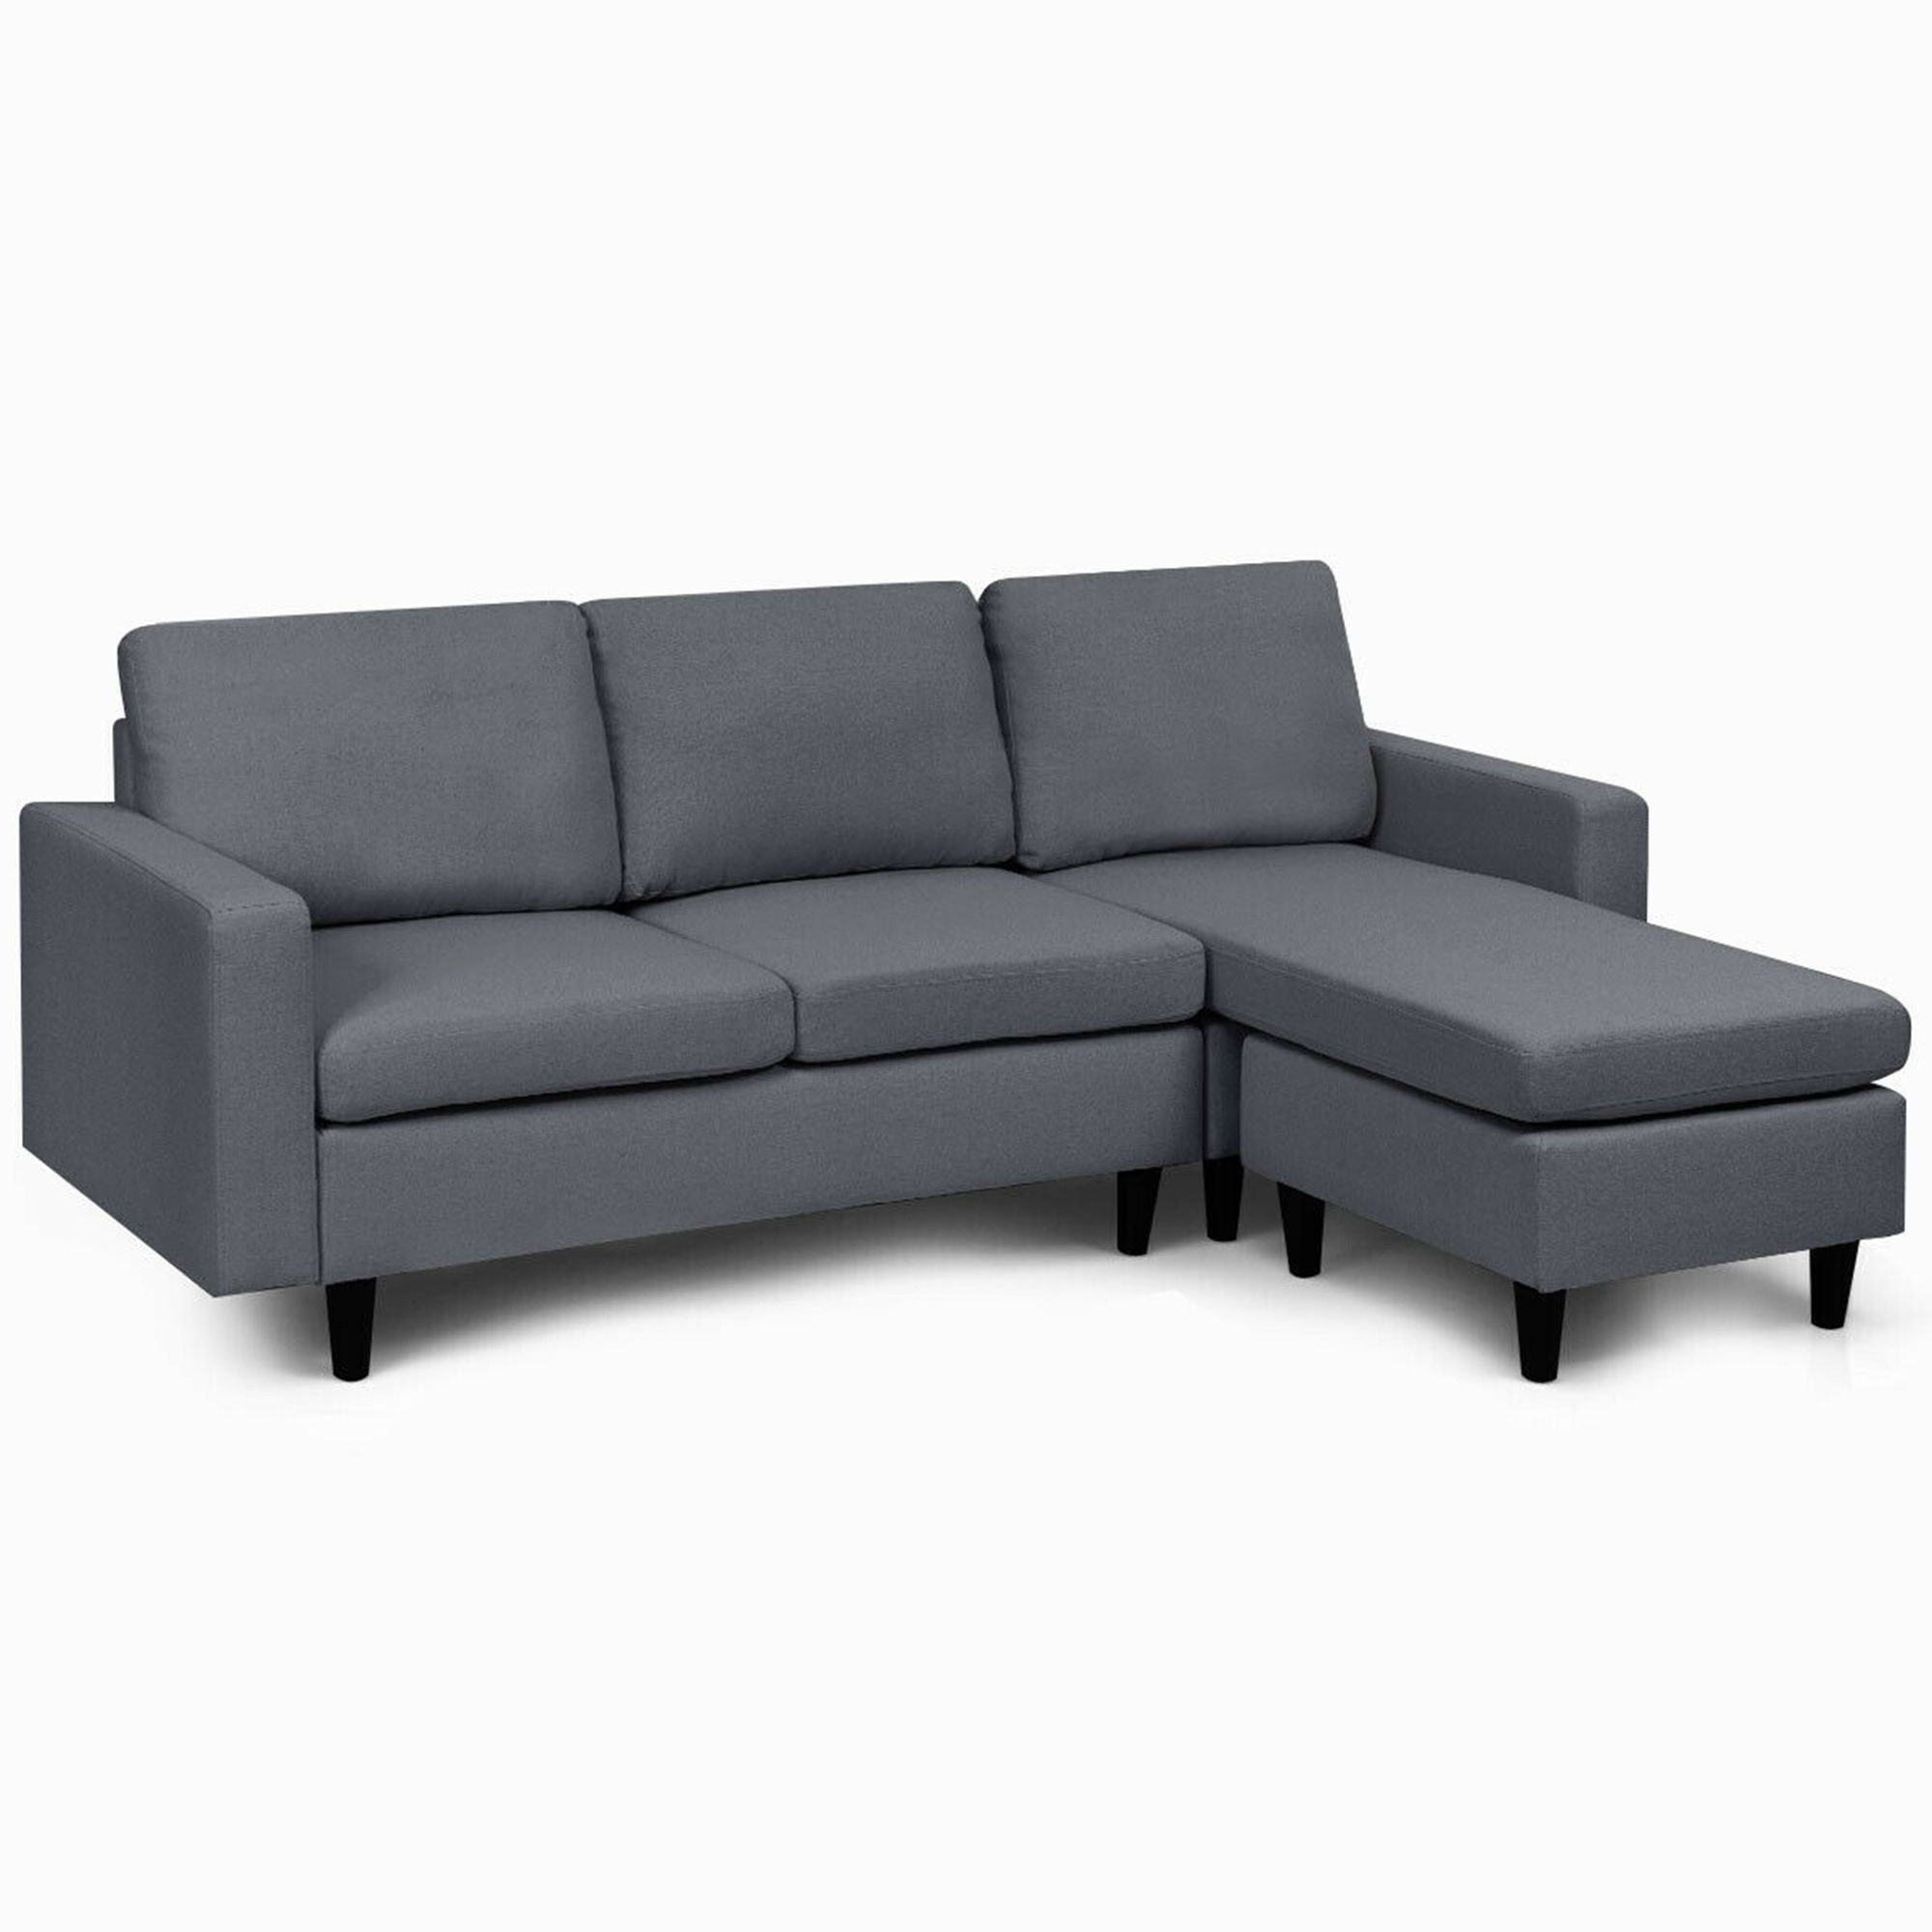 Convertible L Shaped Sectional Sofa Couch W/ Cushion Dark Gray | Ebay Inside Convertible L Shaped Sectional Sofas (View 16 of 20)